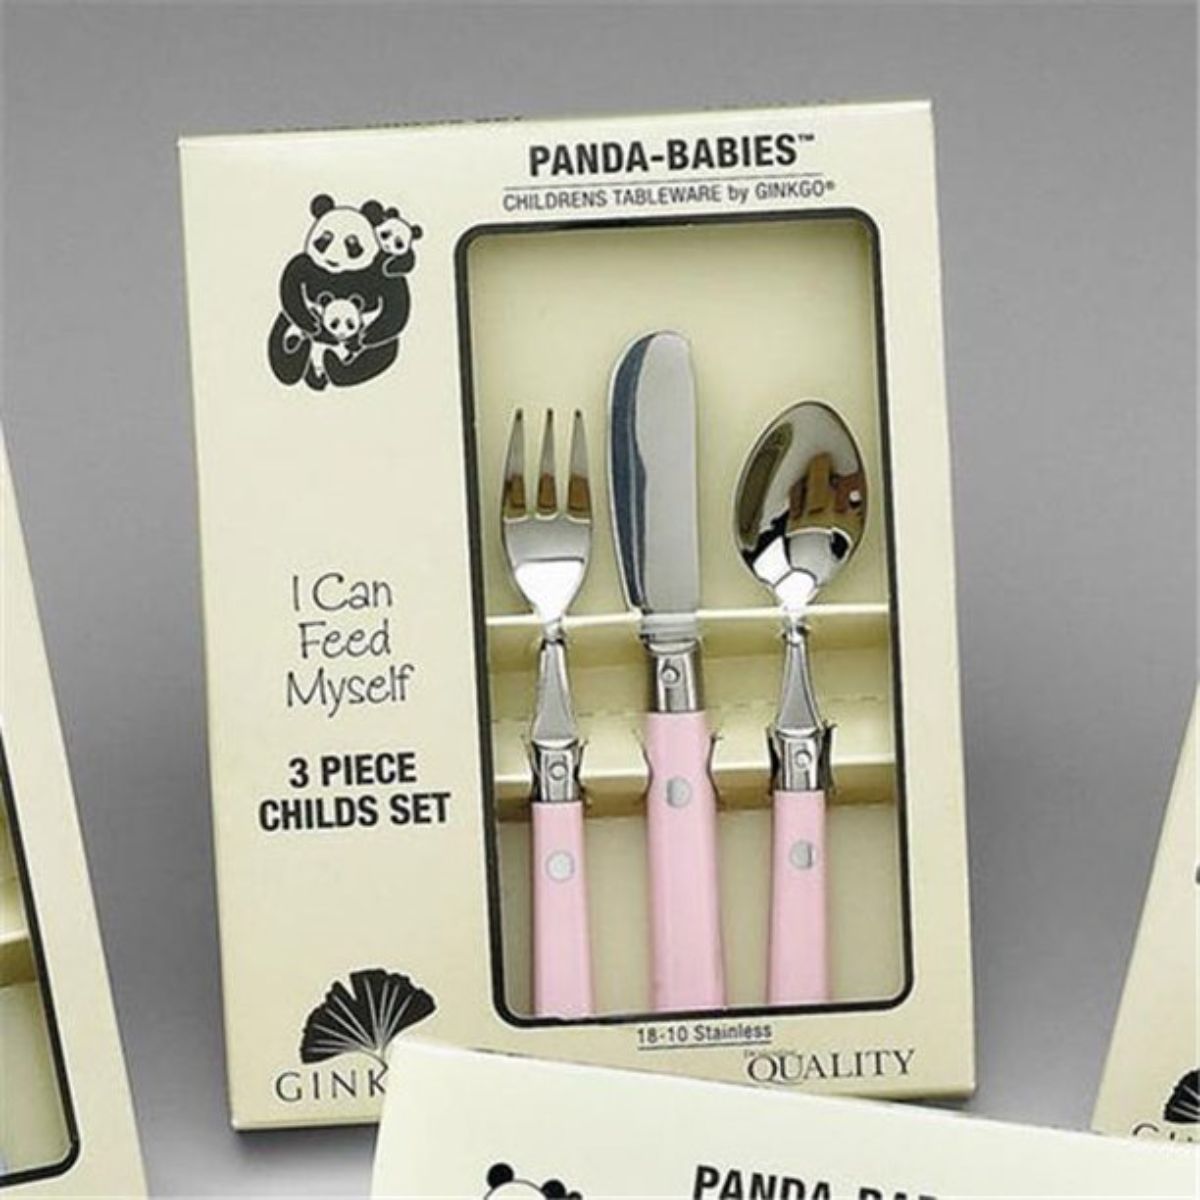 Picture of Ginkgo 079914-21915-0 18-10 Stainless Steel Panda-Babies 3 Piece Childs Set- Light Pink